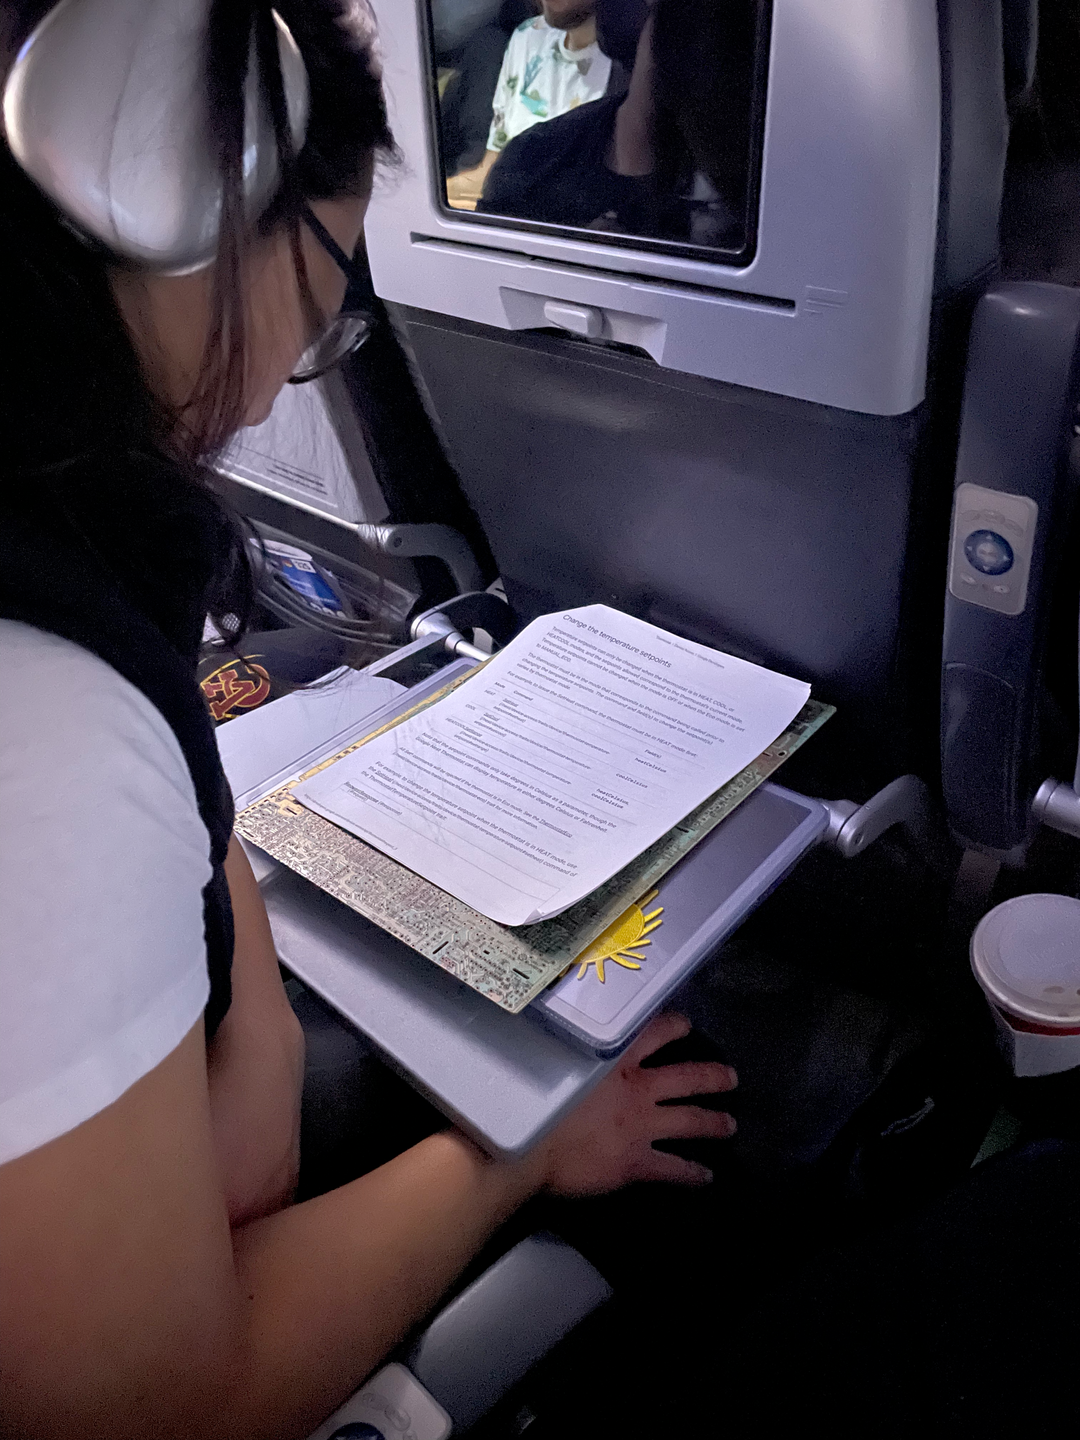 reading thermostat docs on a plane